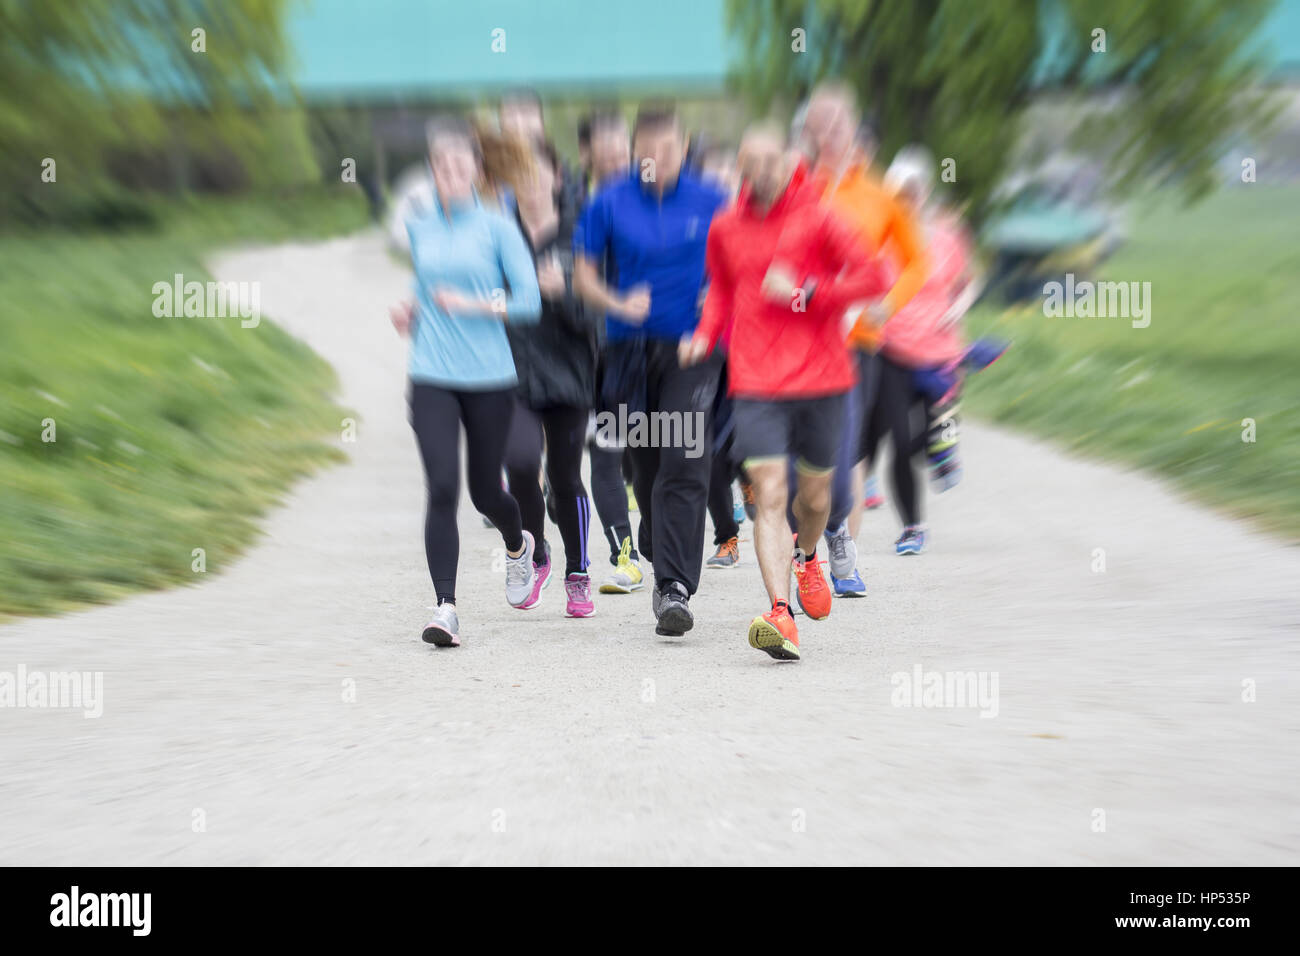 Fitness sport Group of people running jogging outside on road Stock Photo